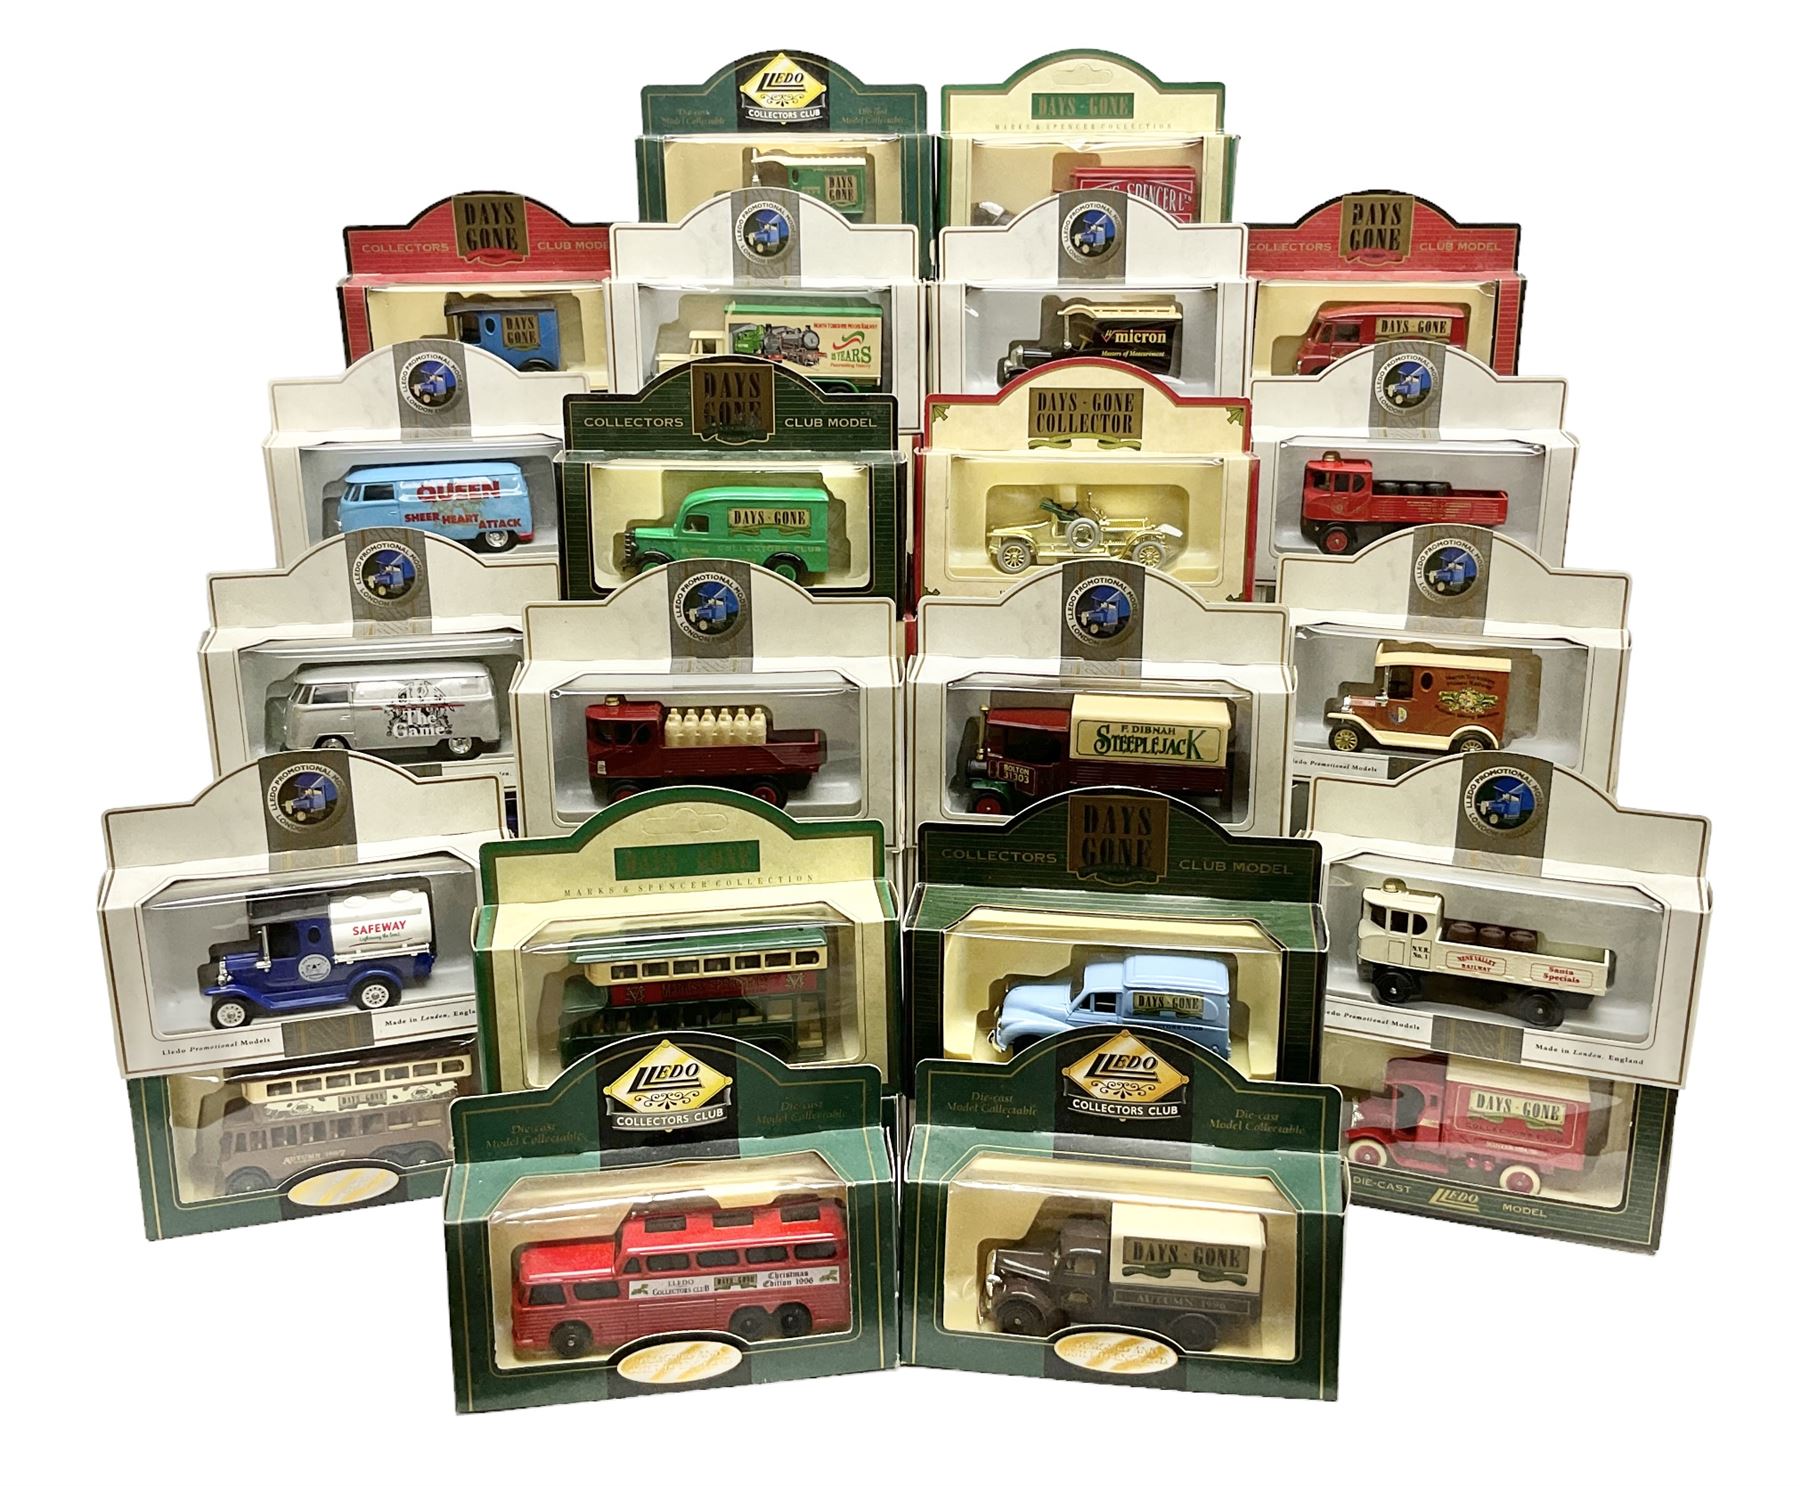 Collection of Days Gone/ Lledo die-cast models including thirty Lledo Promotional Models